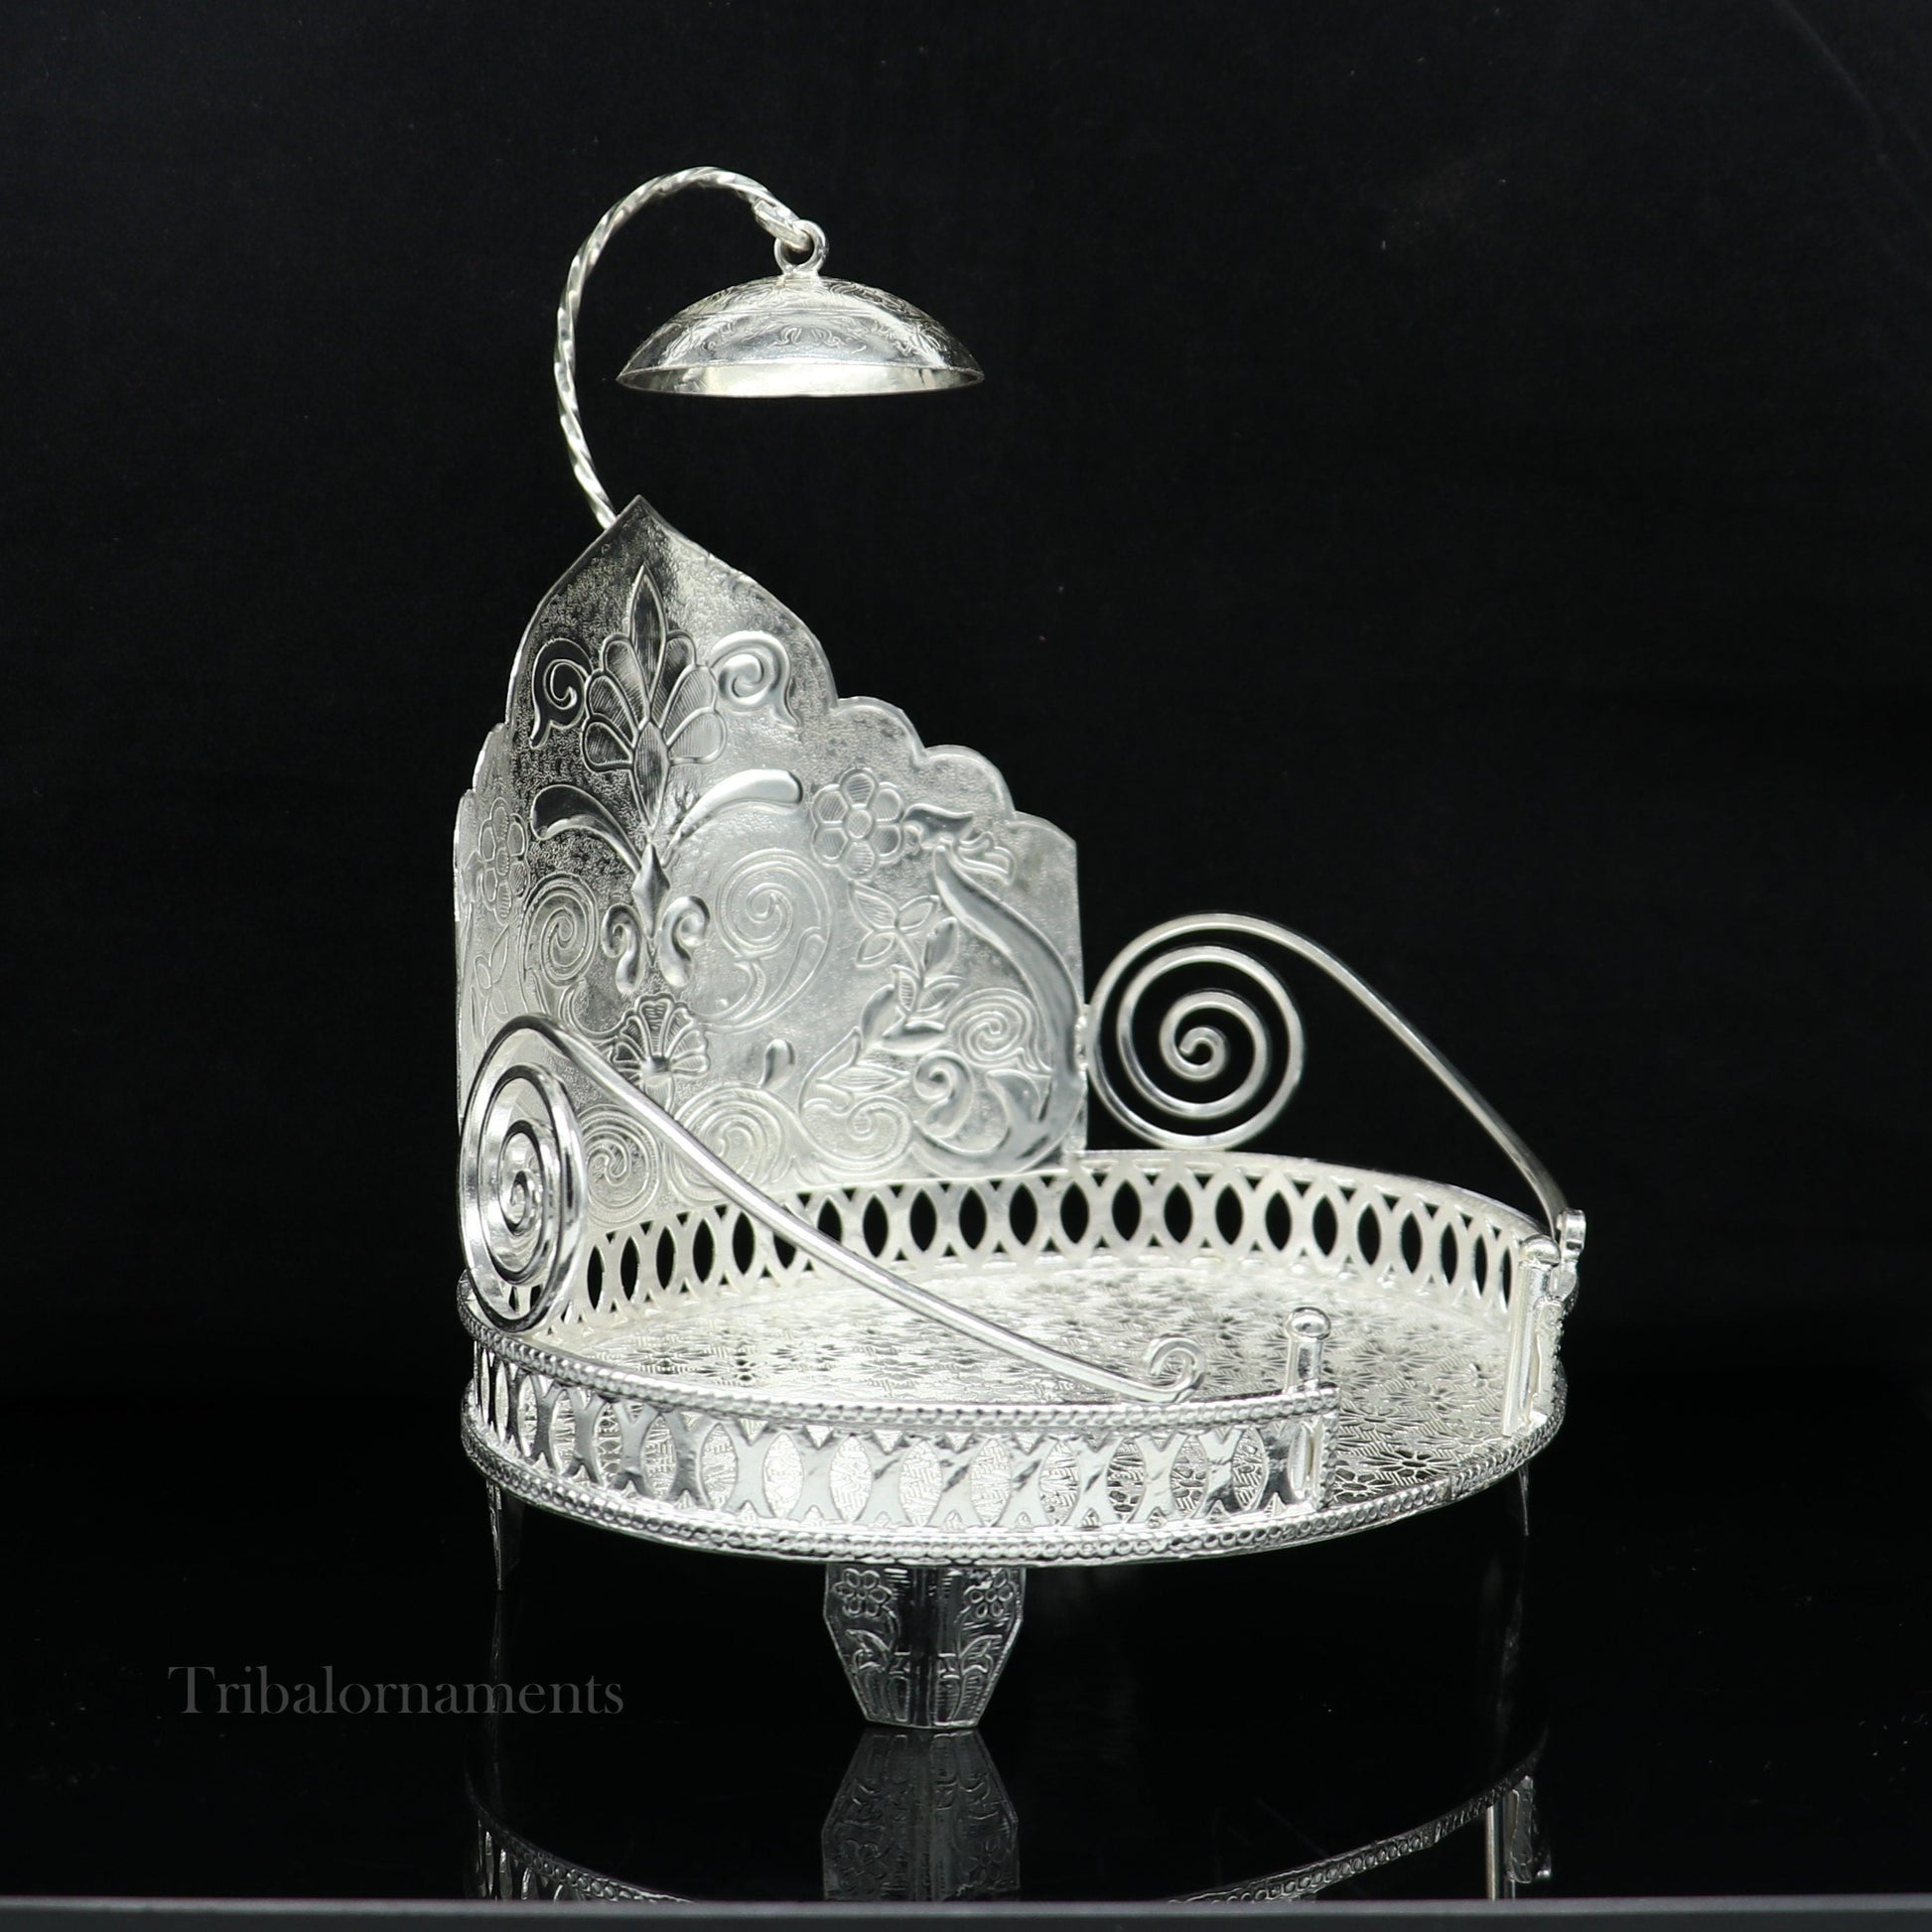 Vintage style 925 sterling silver solid Sinhasan, idol god throne, god statue's stand chair, temple puja article best collectible gift su570 - TRIBAL ORNAMENTS